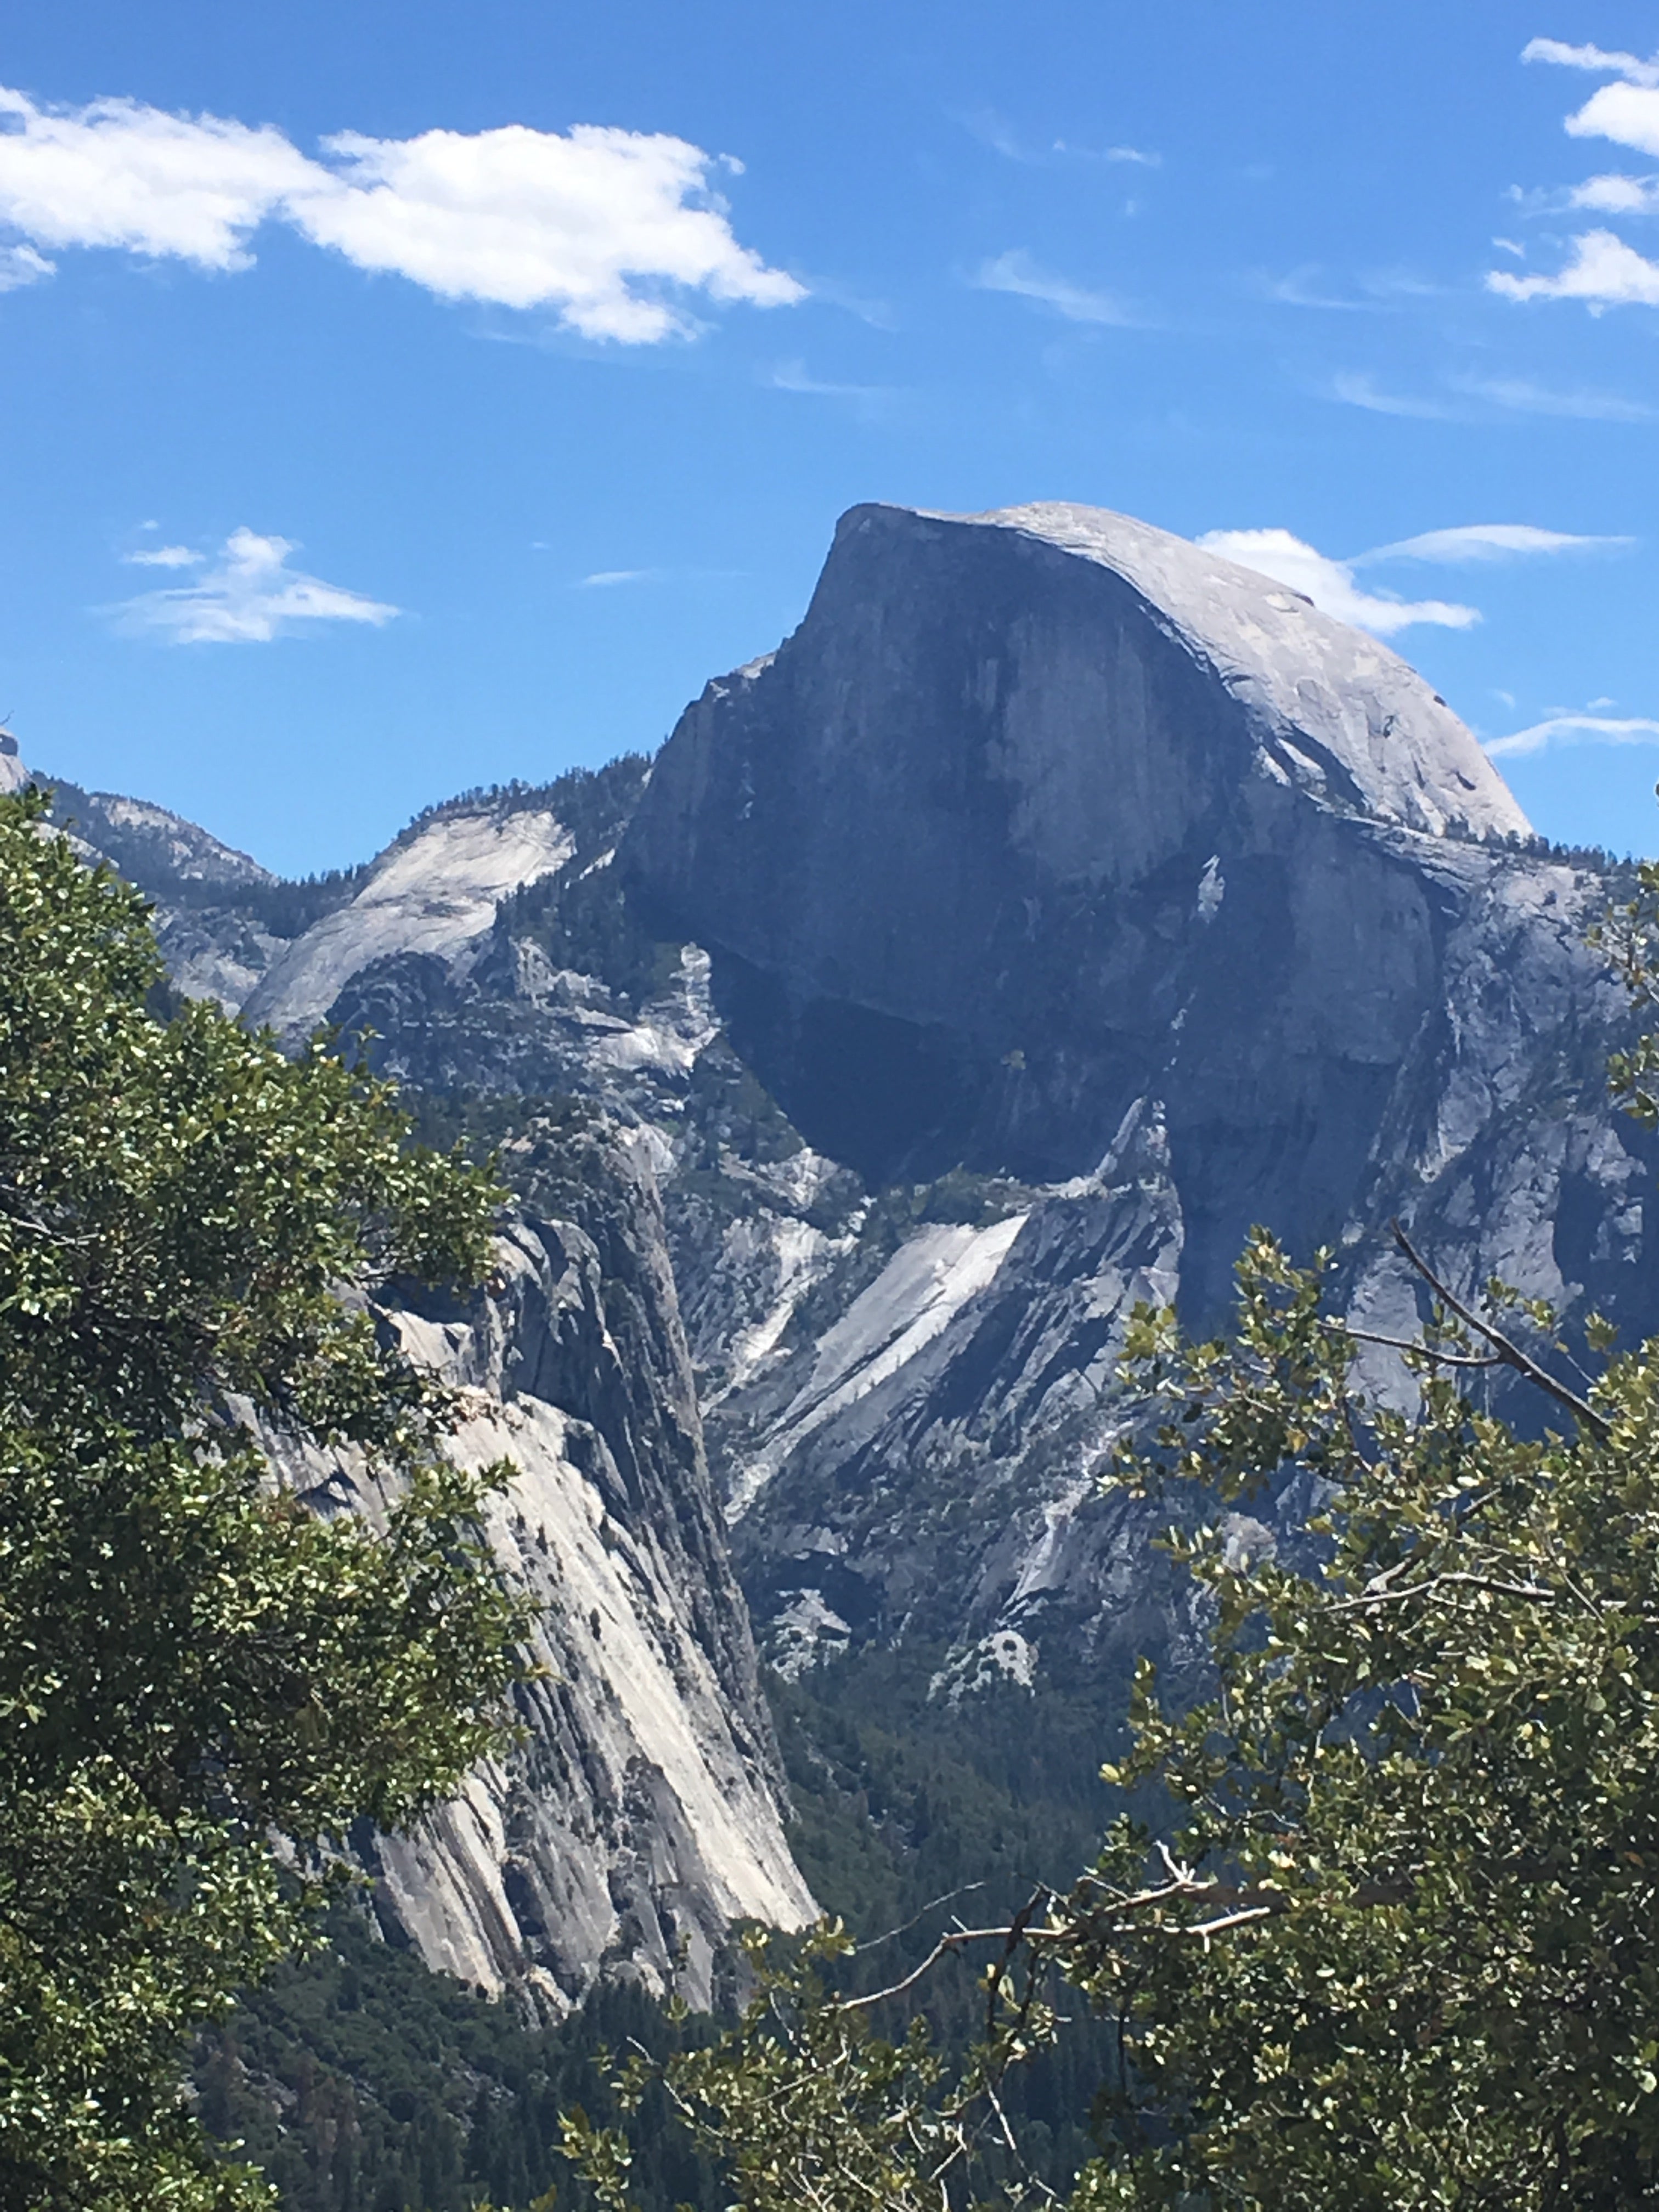 Camper submitted image from Camp 4 — Yosemite National Park - 2